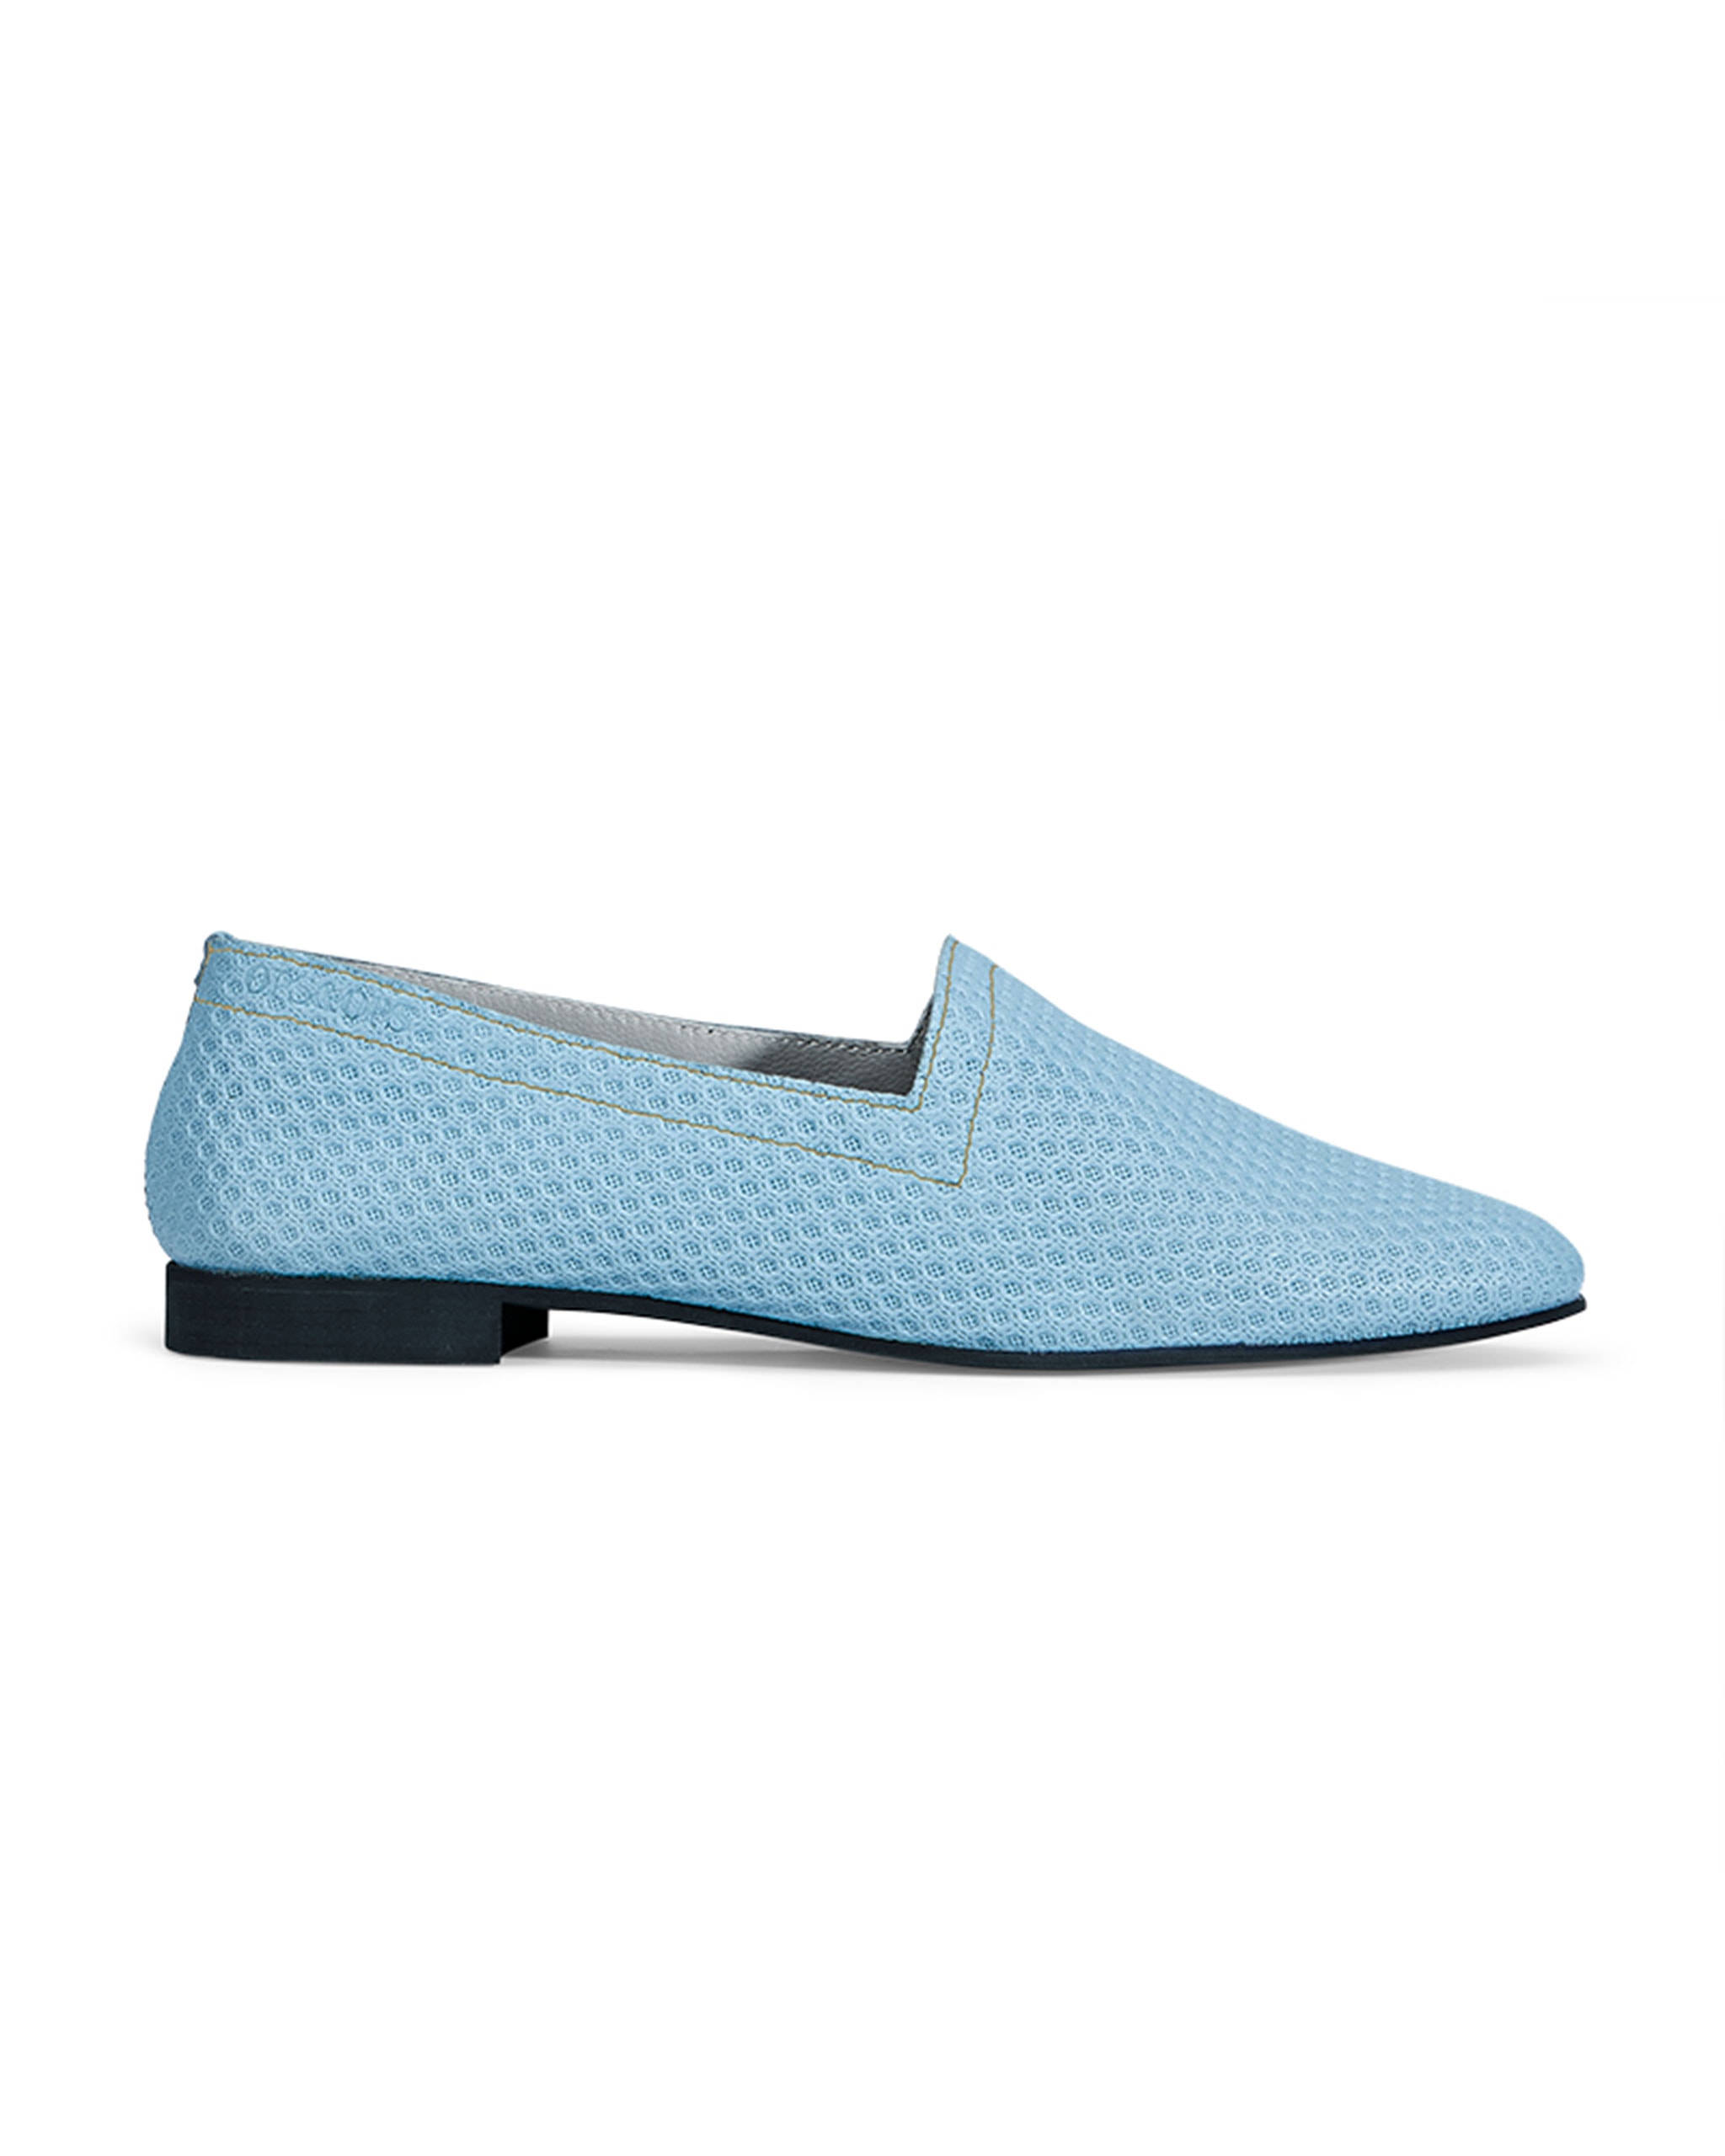 Ops&Ops No10 Action Light Blue perforated leather flats, side view